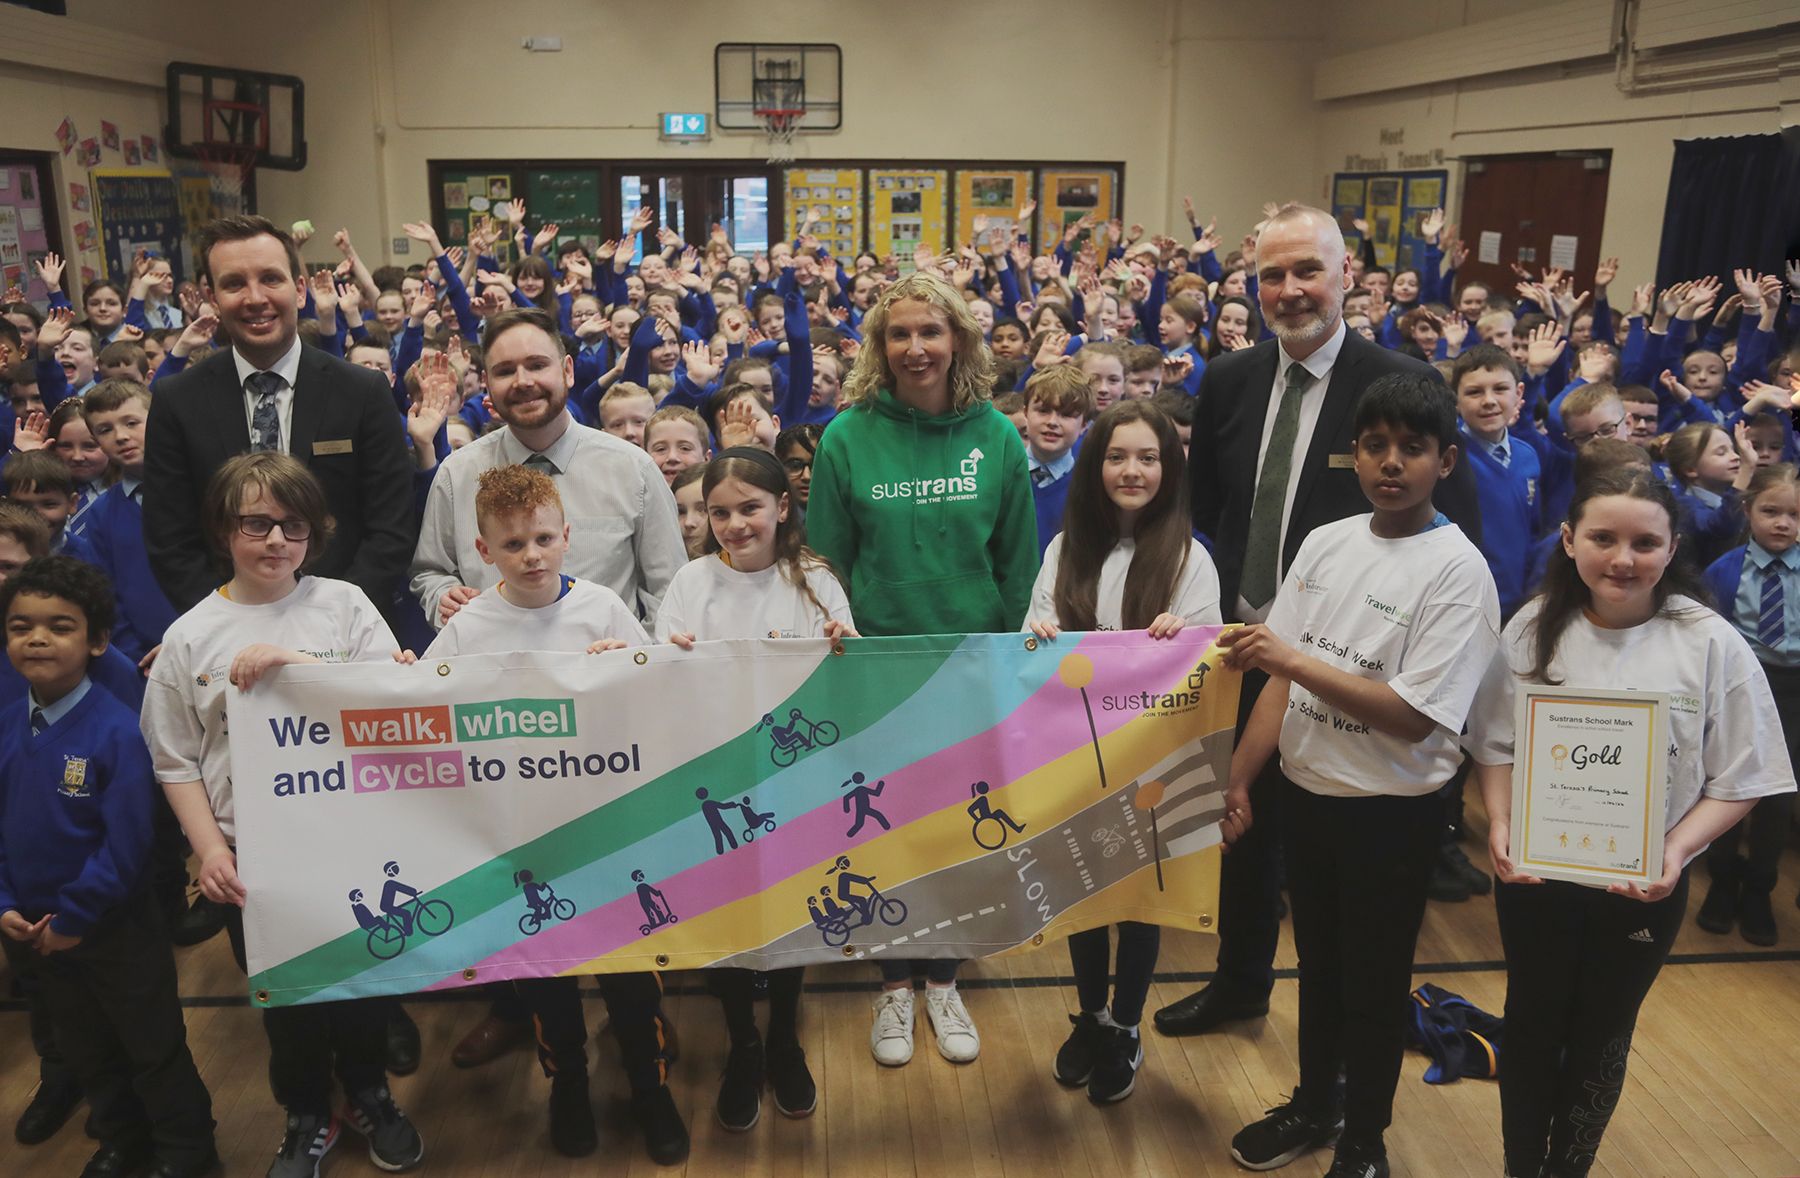 AWARD: Staff and pupils are presented with their Sustrans Gold Award